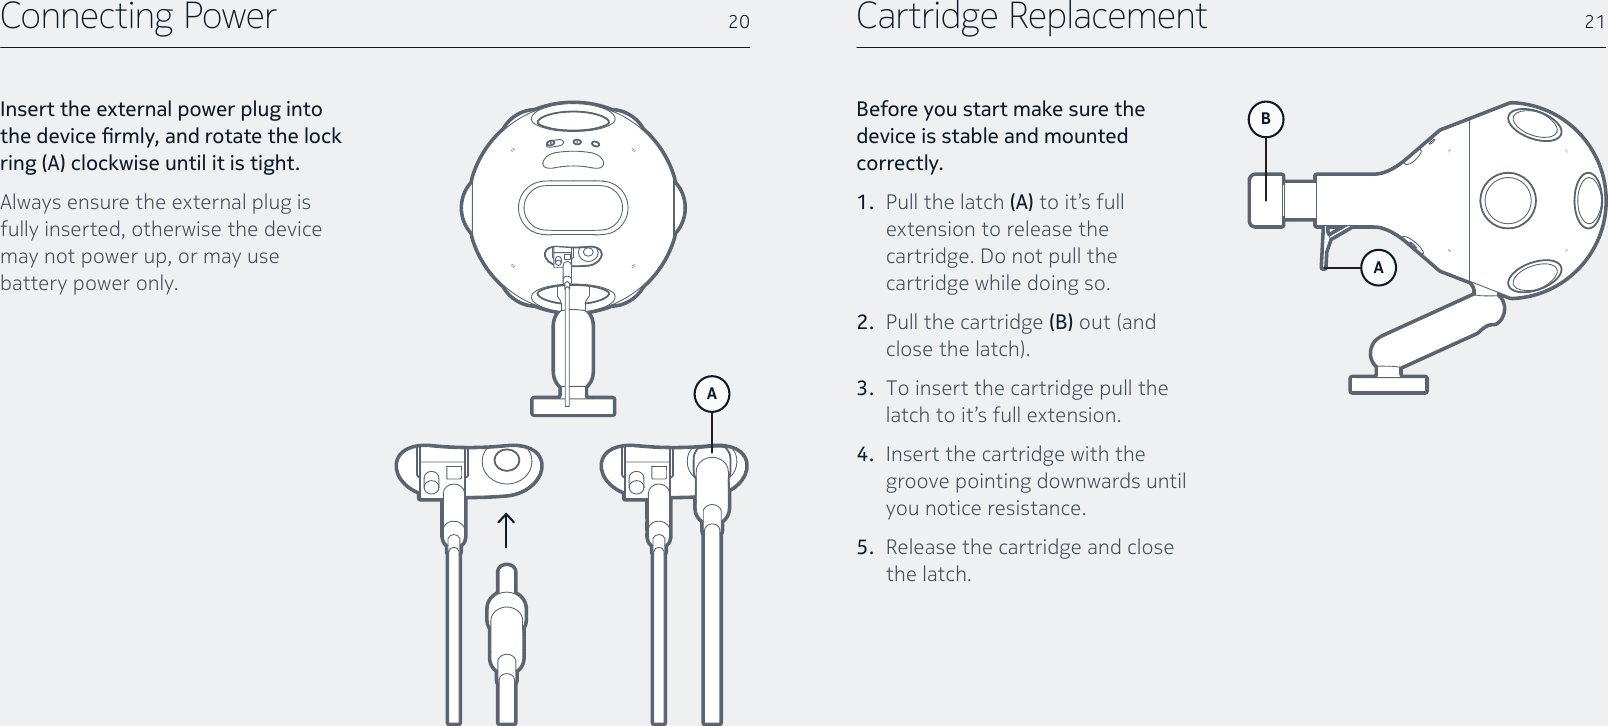 Cartridge ReplacementBefore you start make sure the device is stable and mounted correctly.1.  Pull the latch (A) to it’s full extension to release the cartridge. Do not pull the cartridge while doing so.2.  Pull the cartridge (B) out (and closethelatch).3.  To insert the cartridge pull the latch to it’s full extension.4.  Insert the cartridge with the groove pointing downwards until you notice resistance.5.  Release the cartridge and close the latch.B21Connecting PowerInsert the external power plug into the device rmly, and rotate the lock ring (A) clockwise until it is tight.Always ensure the external plug is fully inserted, otherwise the device may not power up, or may use battery power only.20AA